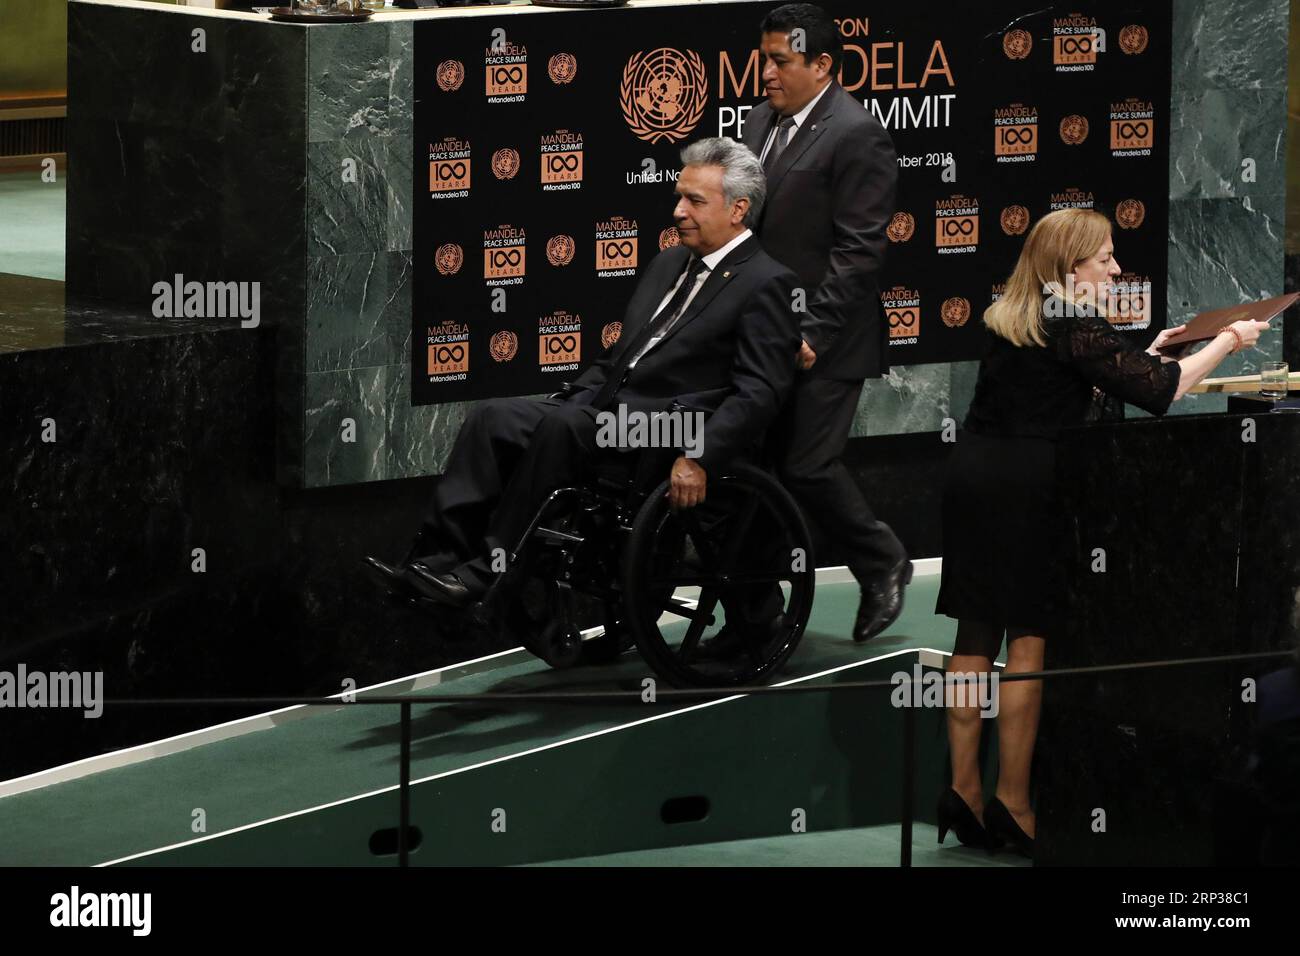 (180924) -- UNITED NATIONS, Sept. 24, 2018 -- Ecuadorian President Lenin Moreno (1st L) leaves after addressing the Nelson Mandela Peace Summit held during the ongoing UN General Assembly s annual top-level meeting at the UN headquarters in New York, on Sept. 24, 2018. UN Secretary-General Antonio Guterres said Monday that Nelson Mandela embodied the highest values of the world body, in remembrance of the late South African leader who was a hallmark in the fight against apartheid. ) UN-GENERAL ASSEMBLY-NELSON MANDELA PEACE SUMMIT LixMuzi PUBLICATIONxNOTxINxCHN Stock Photo